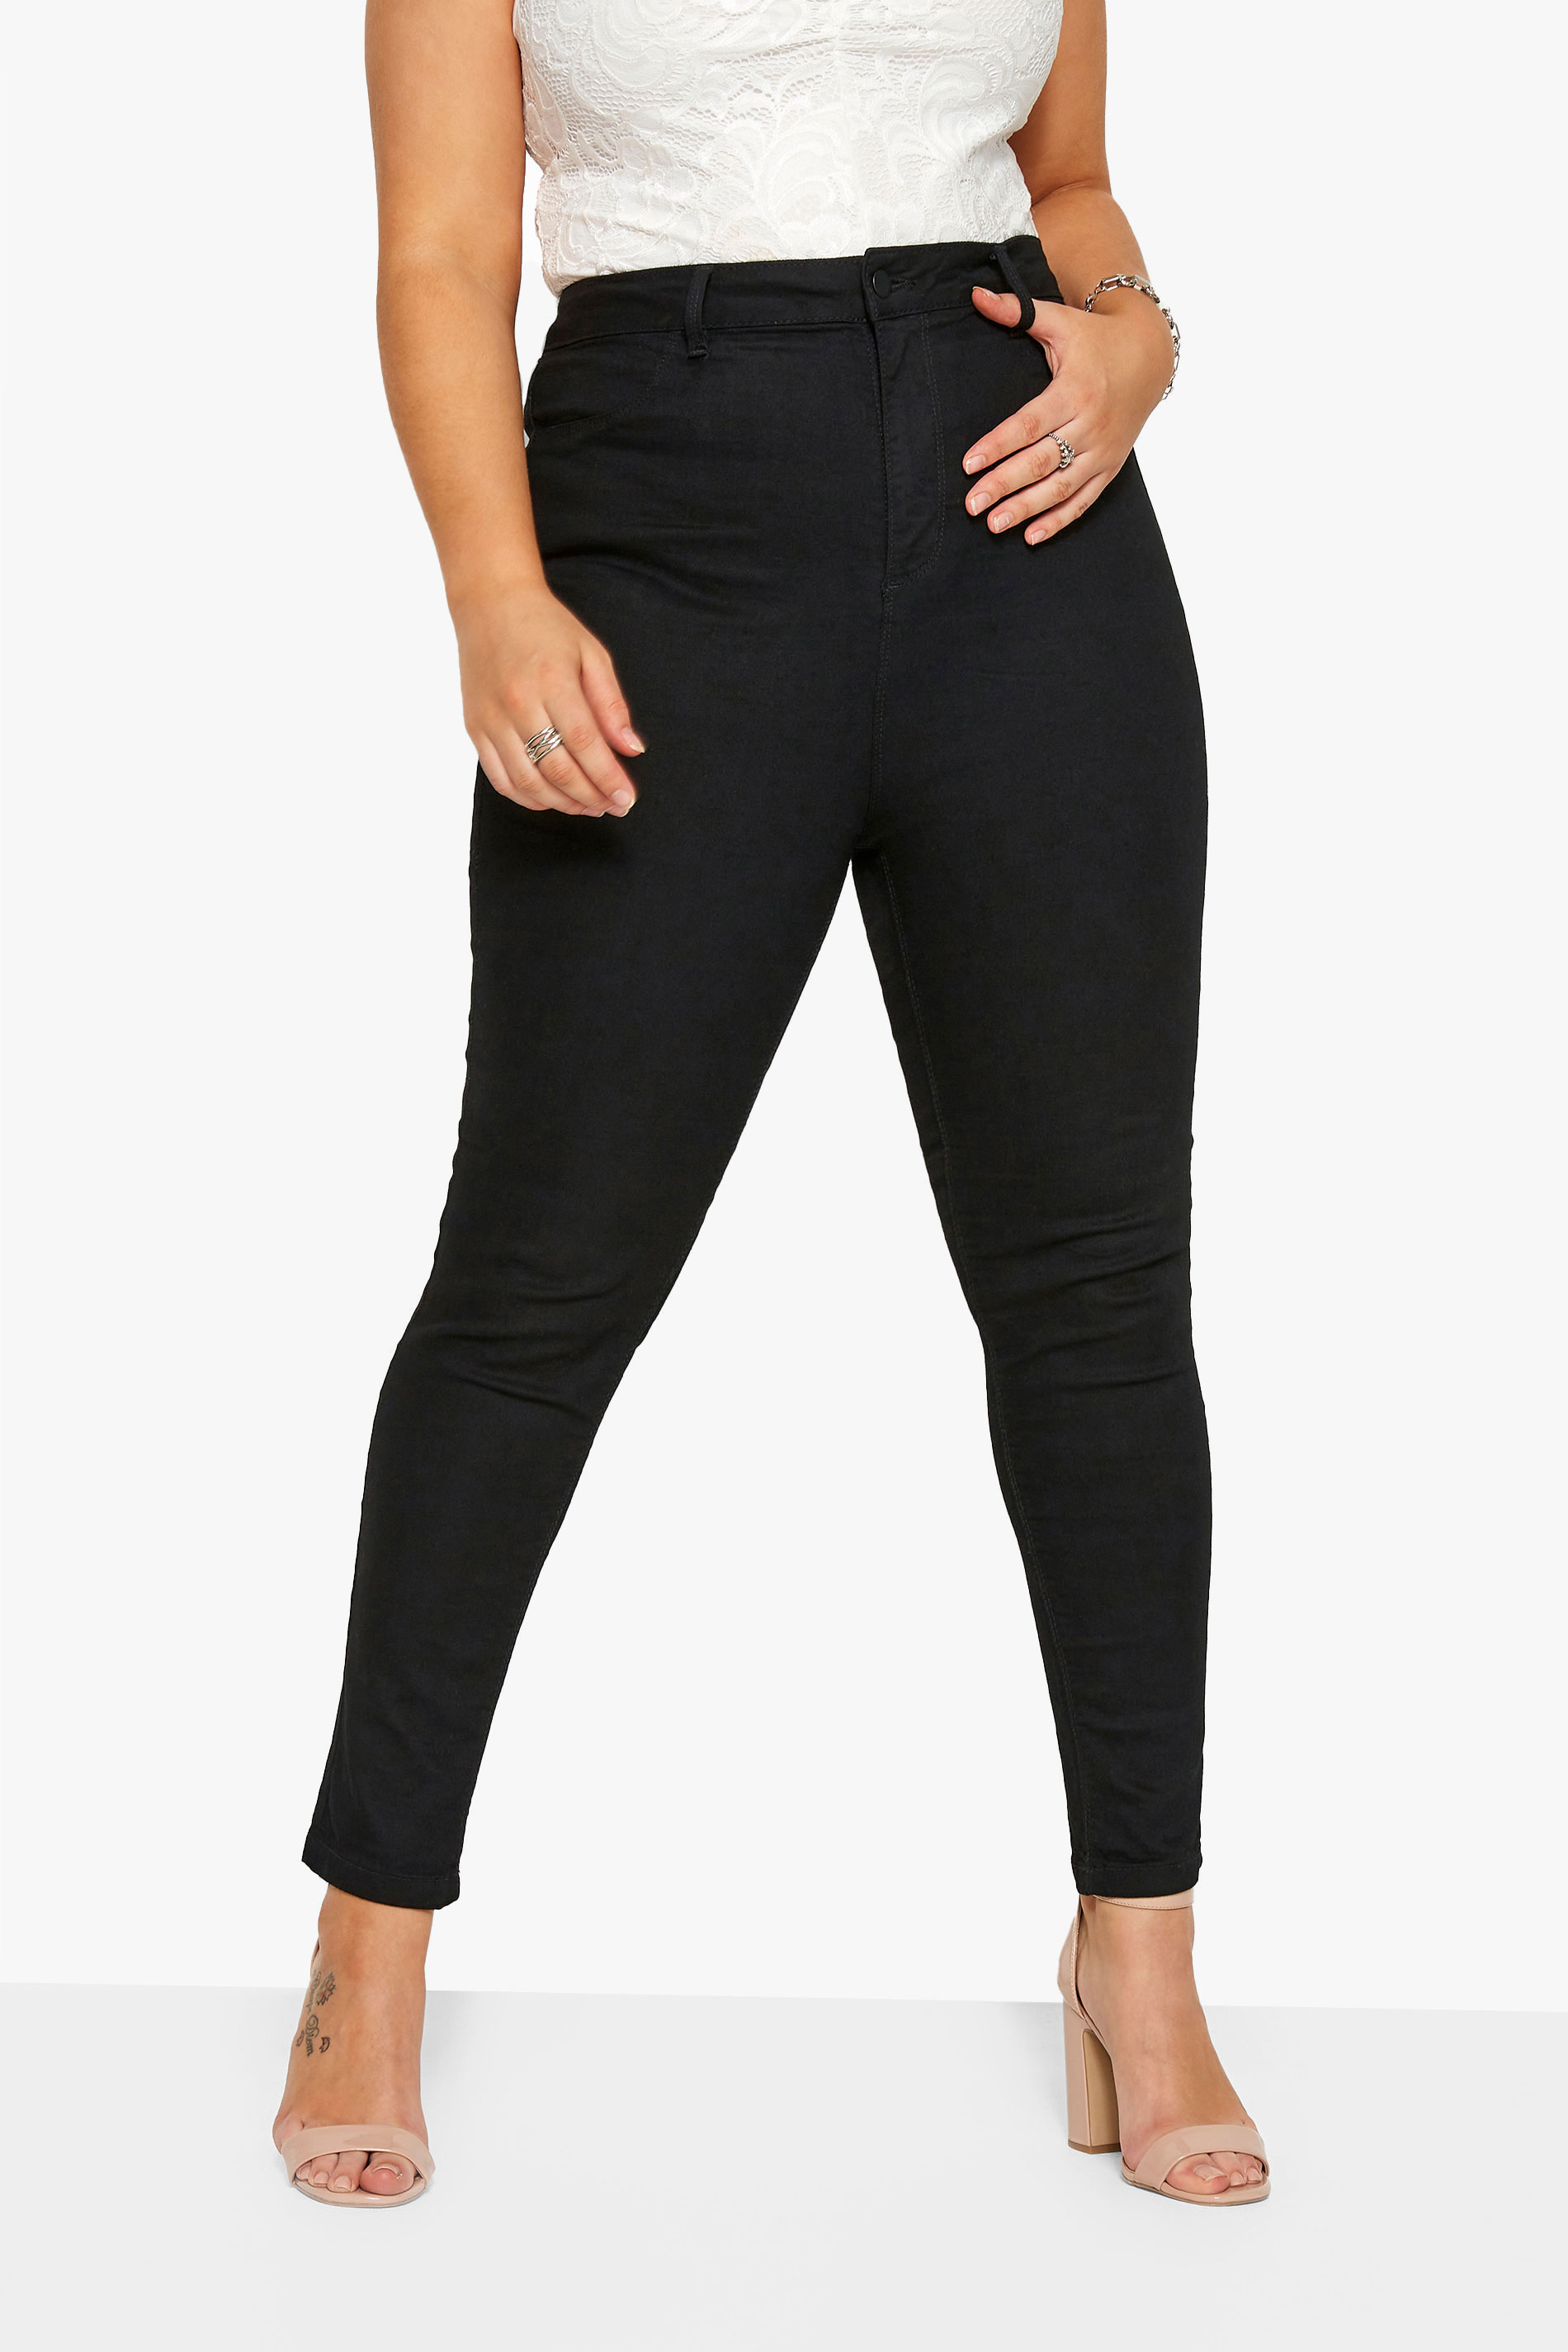 YOURS FOR GOOD Curve Black Skinny Stretch AVA Jeans 1